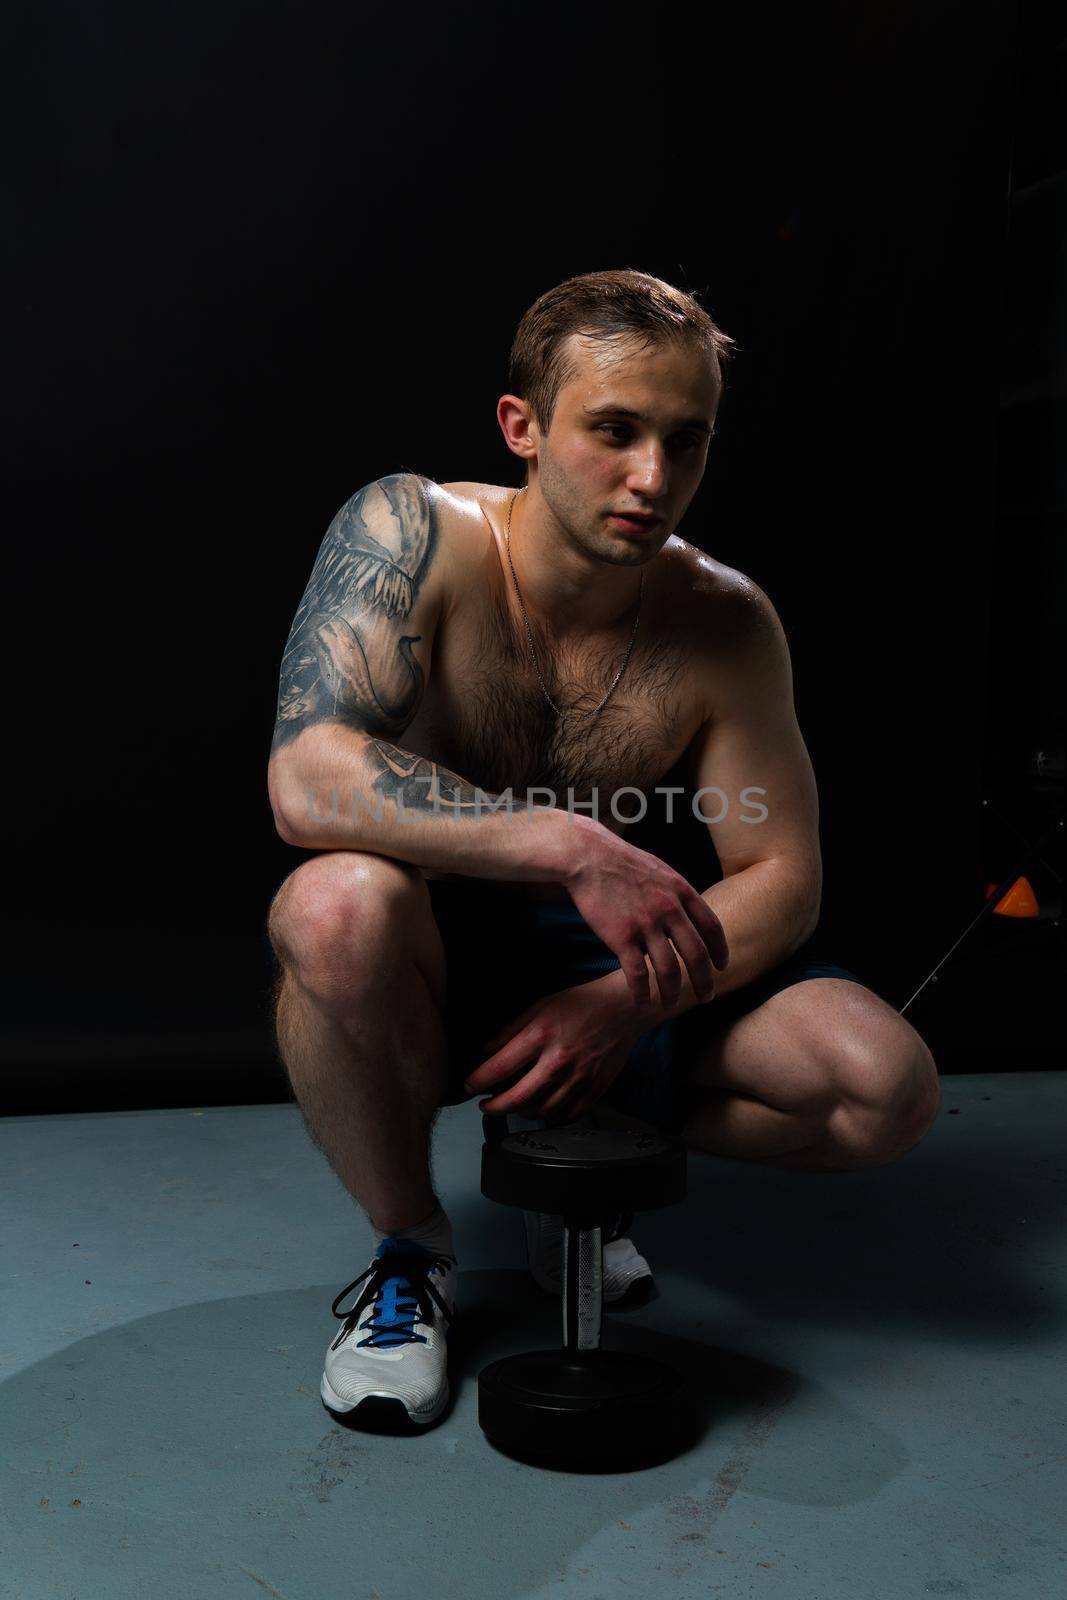 Man on black background keeps dumbbells pumped up in fitness bodybuilding sexy torso, athlete training workout lifting hand, shirtless lifestyle. handsome people fit